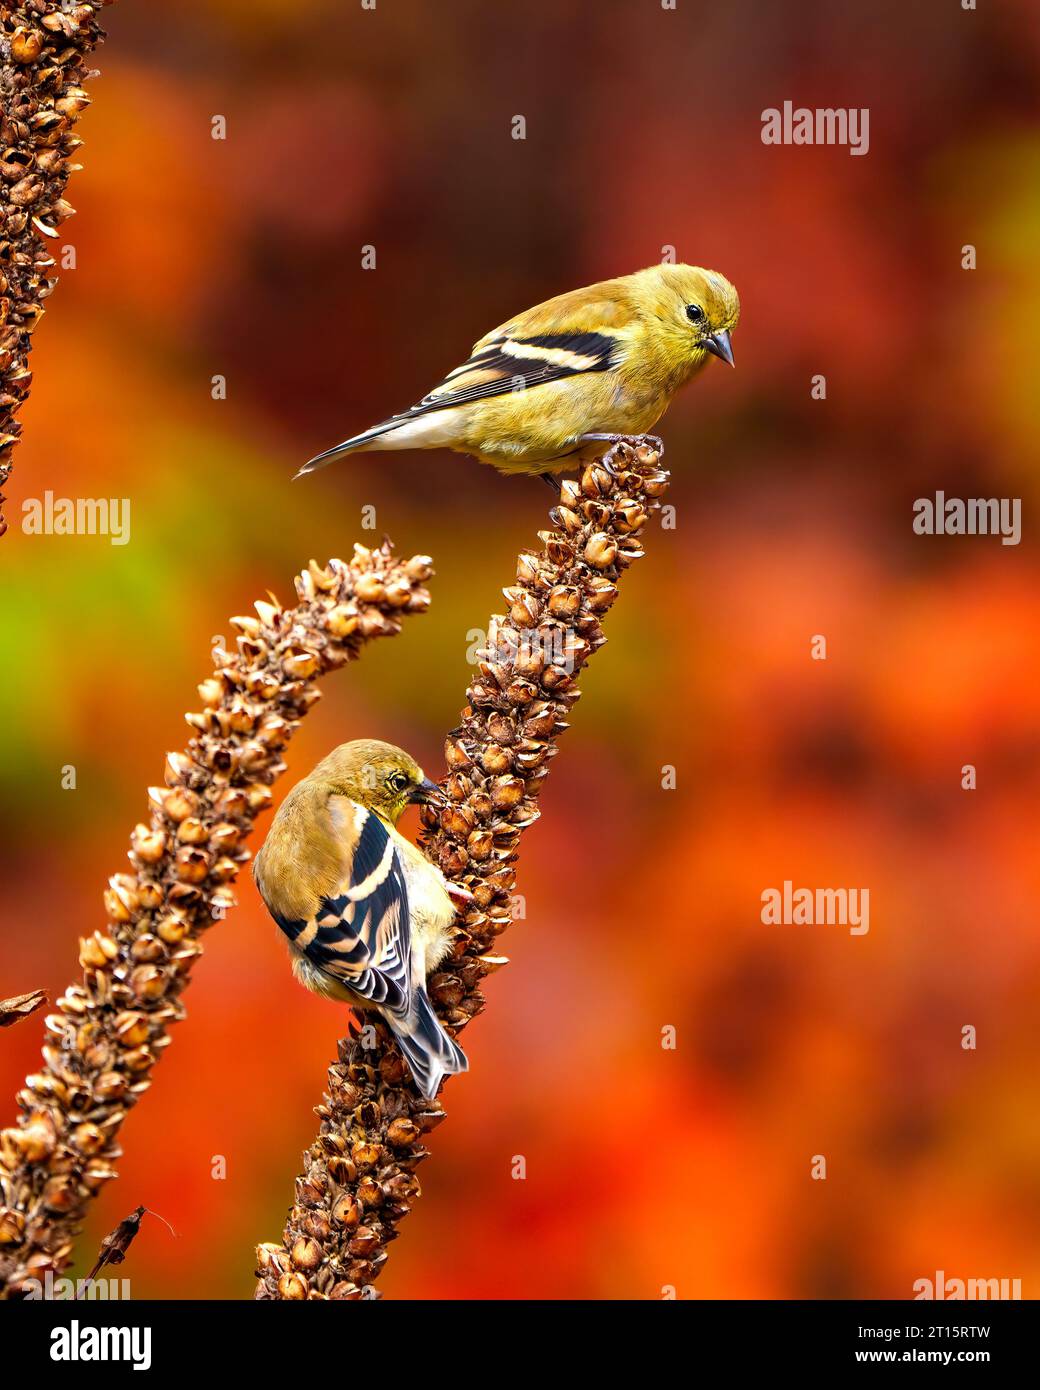 Finch birds close-up side view perched on a dried mullein stalks plant and with a autumn orange background in their environment and habitat . Stock Photo